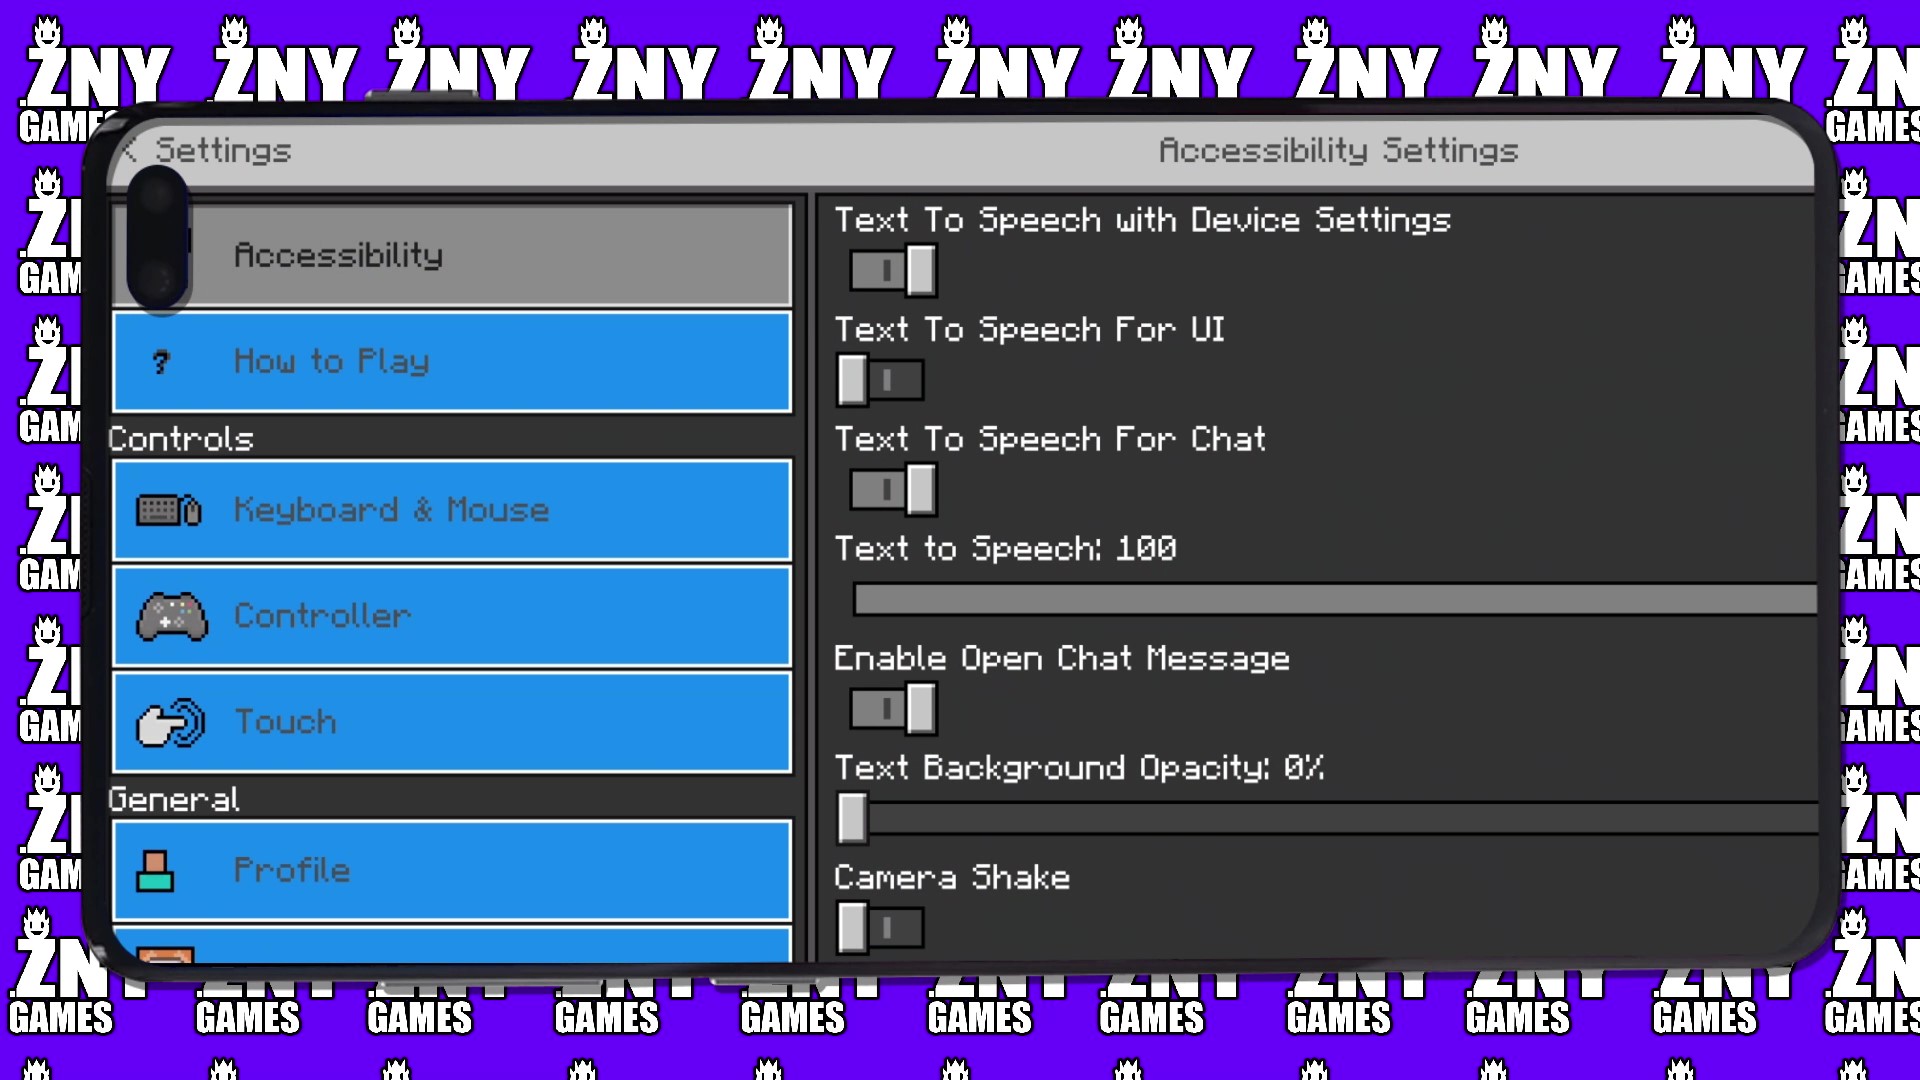 znygames gui texturepack fortnite edition android ios - settings